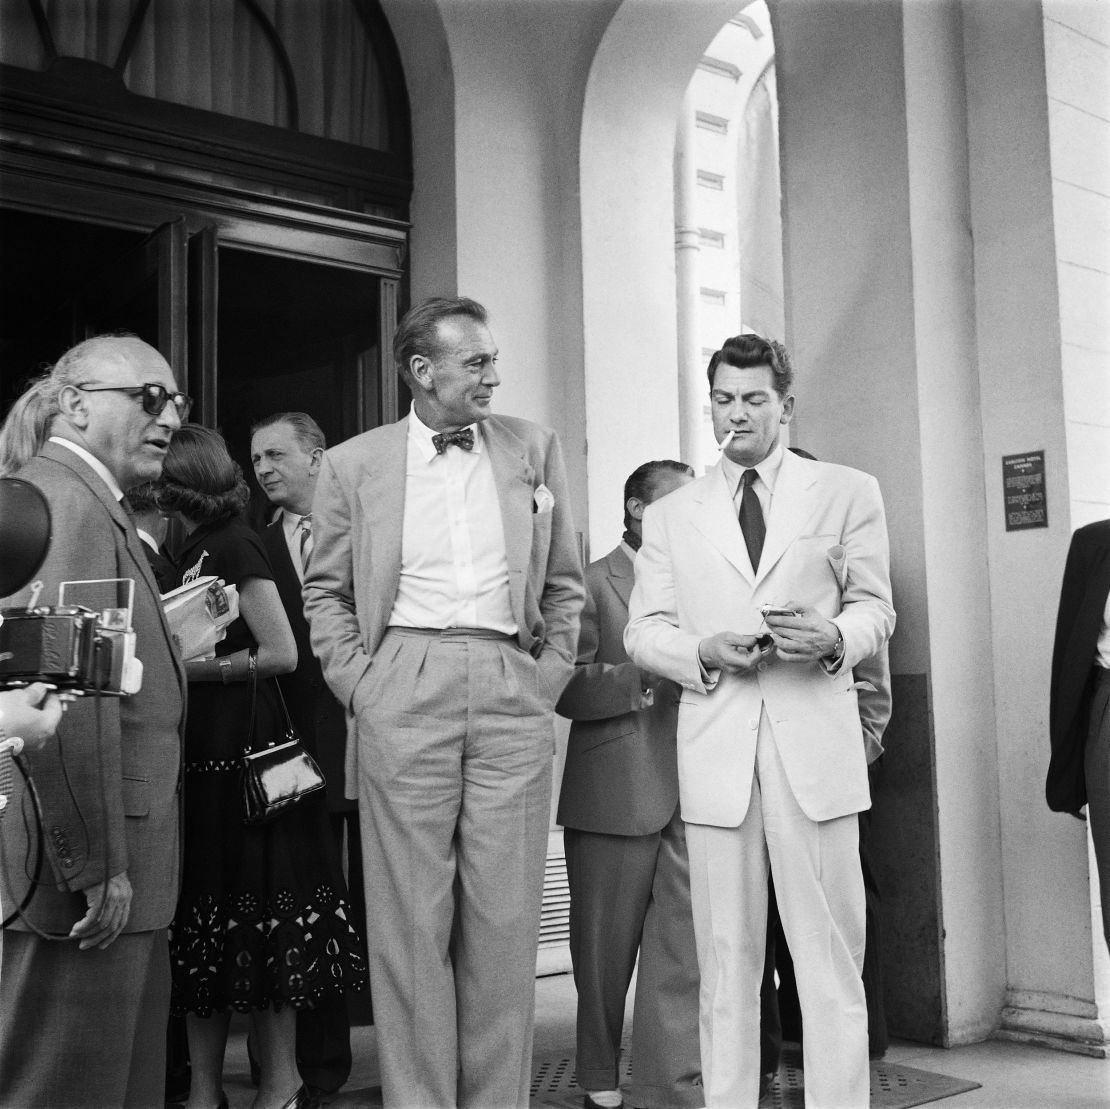 Cigarettes and bow ties were the height of fashion in the 50s. American actor Gary Cooper (left) talks to French actor Jean Marais (right) during the Cannes Film Festival in 1953.